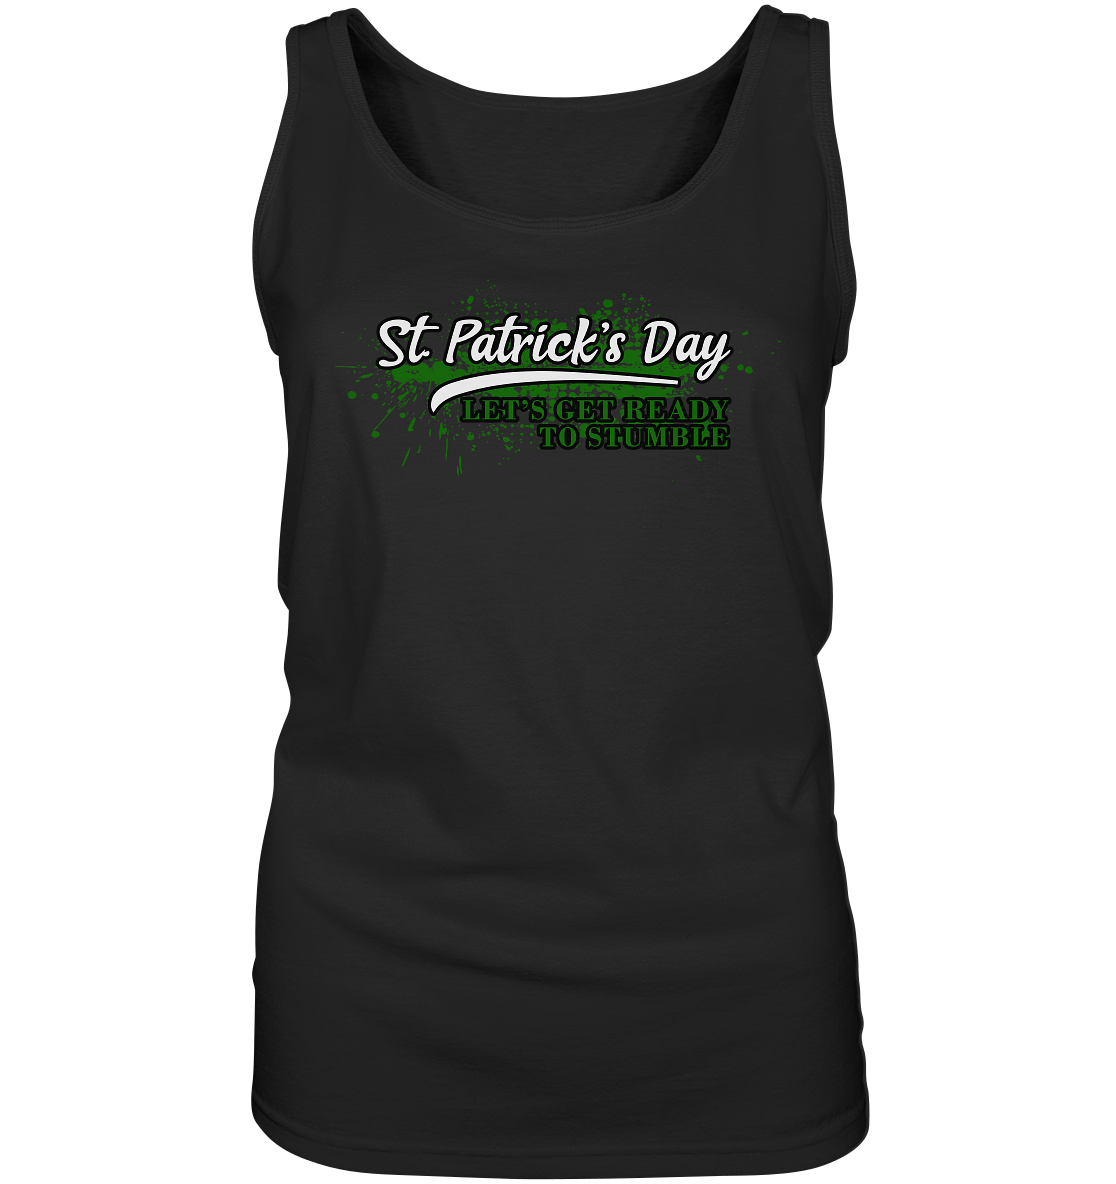 St. Patrick's Day "Let's Get Ready To Stumble" - Ladies Tank-Top